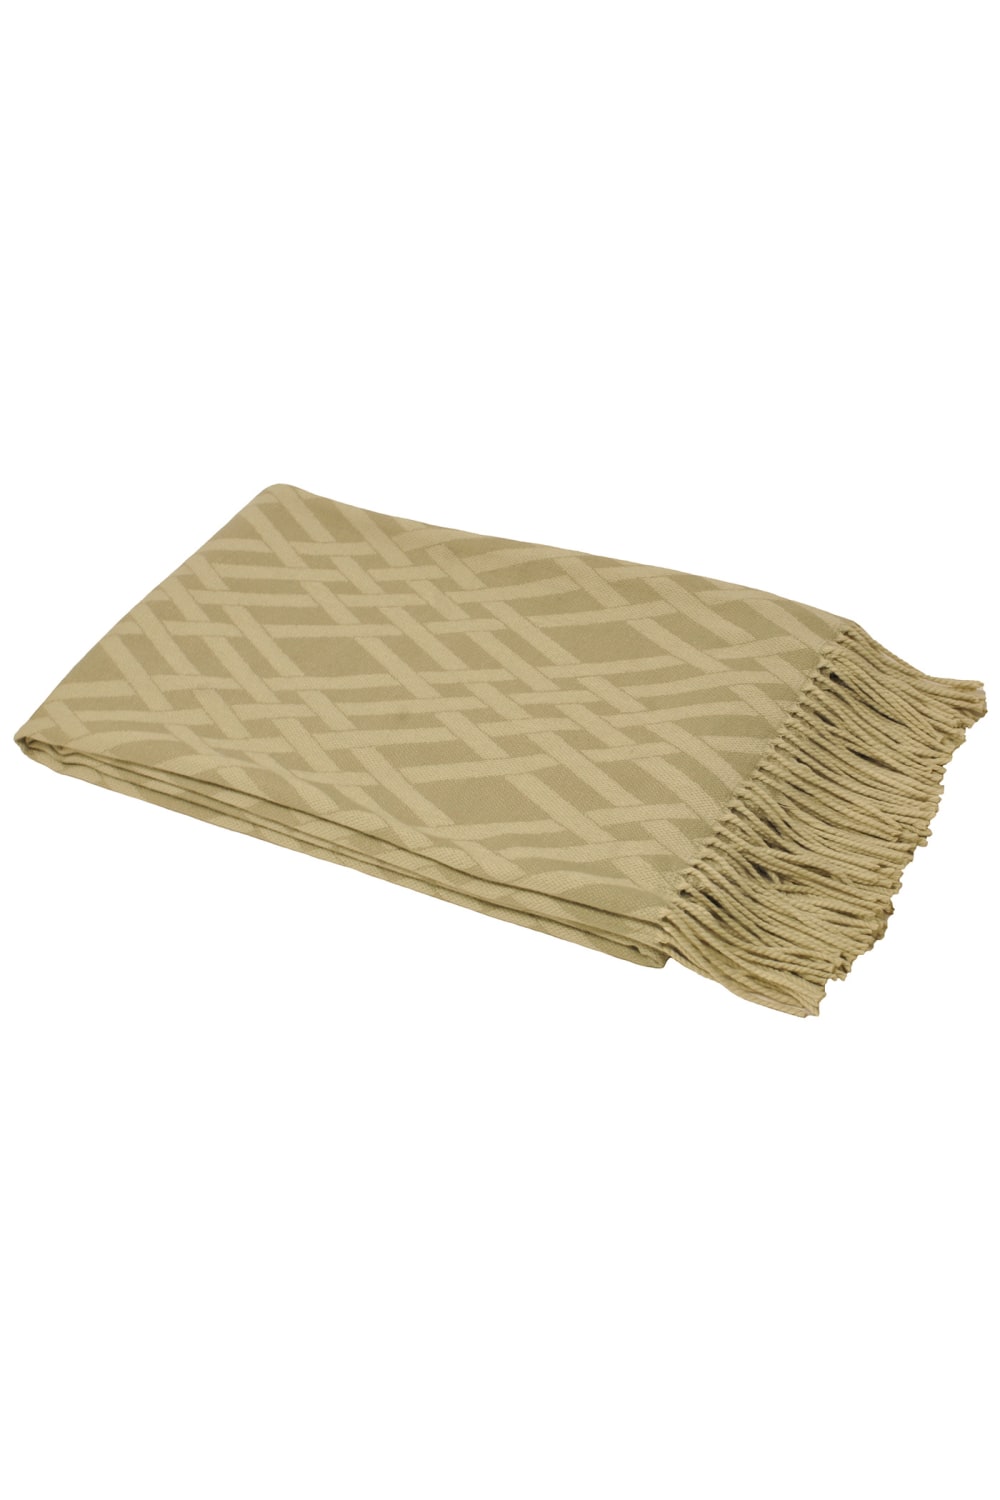 Riva Home Madison Throw (Beige/Natural) (55 x 79 inch) (UK - 140x200cm)